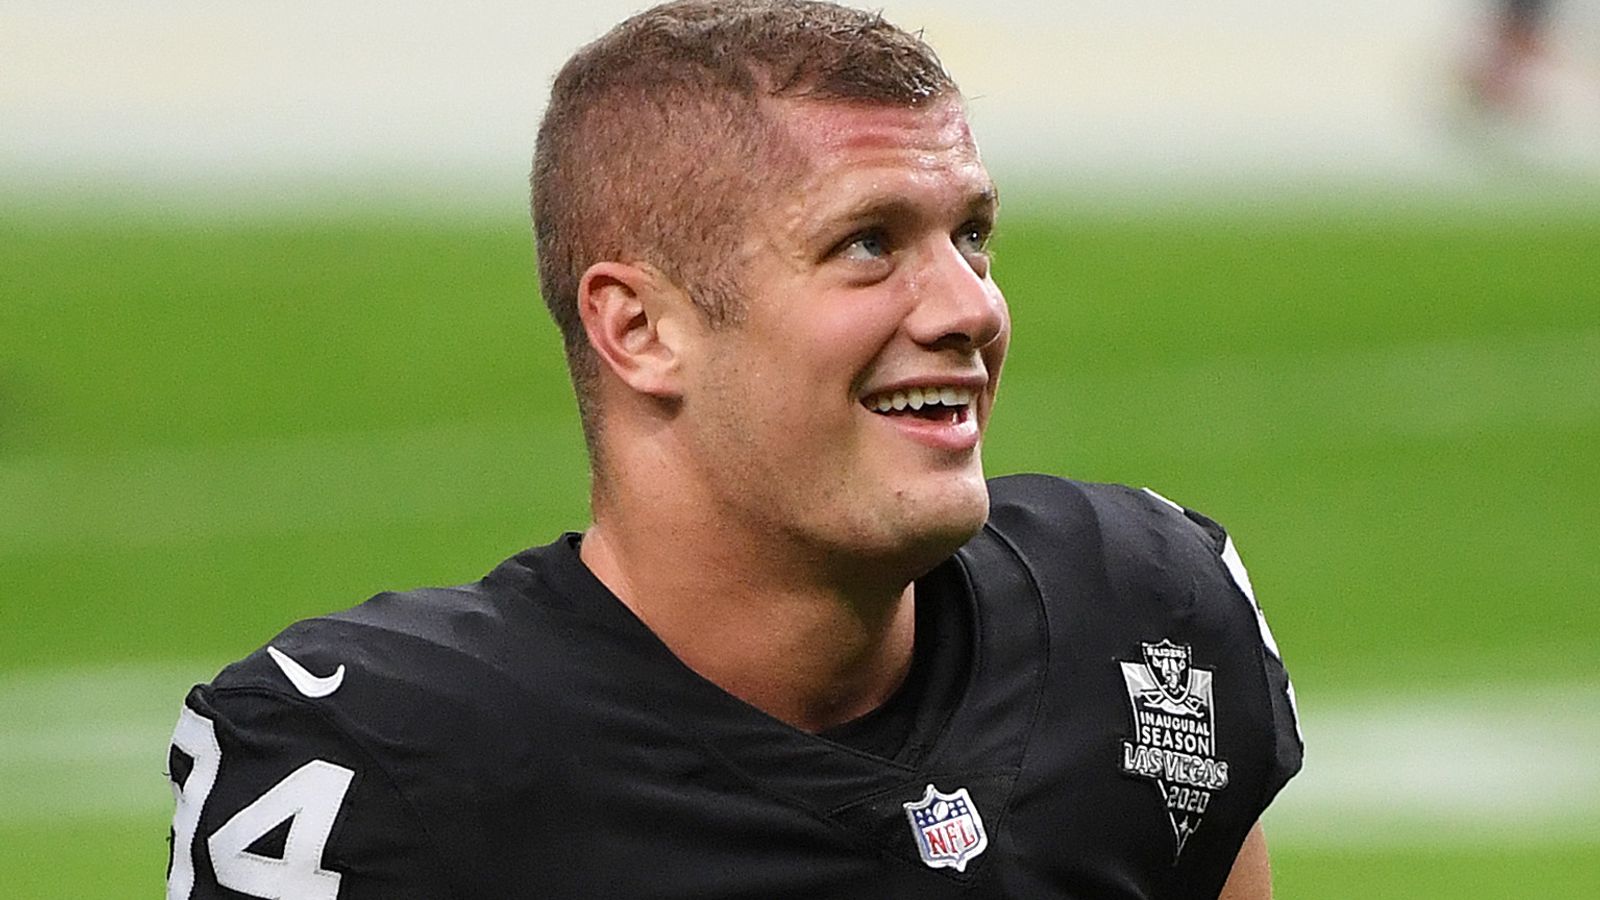 Carl Nassib: Las Vegas Raiders defensive end becomes first active NFL player to come out as gay